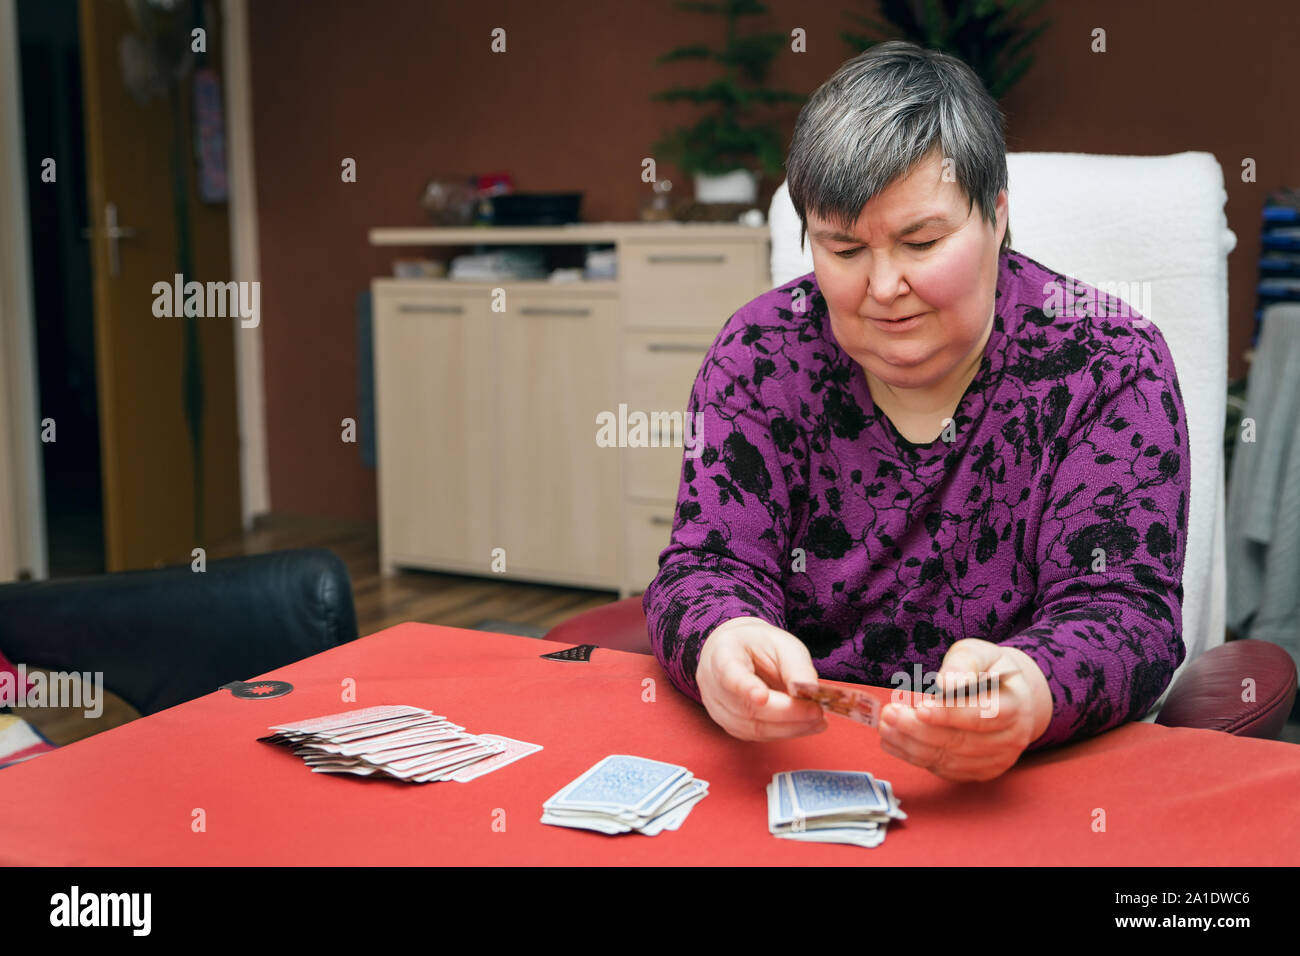 mentally disabled woman playing cards, focus and concentration Stock Photo